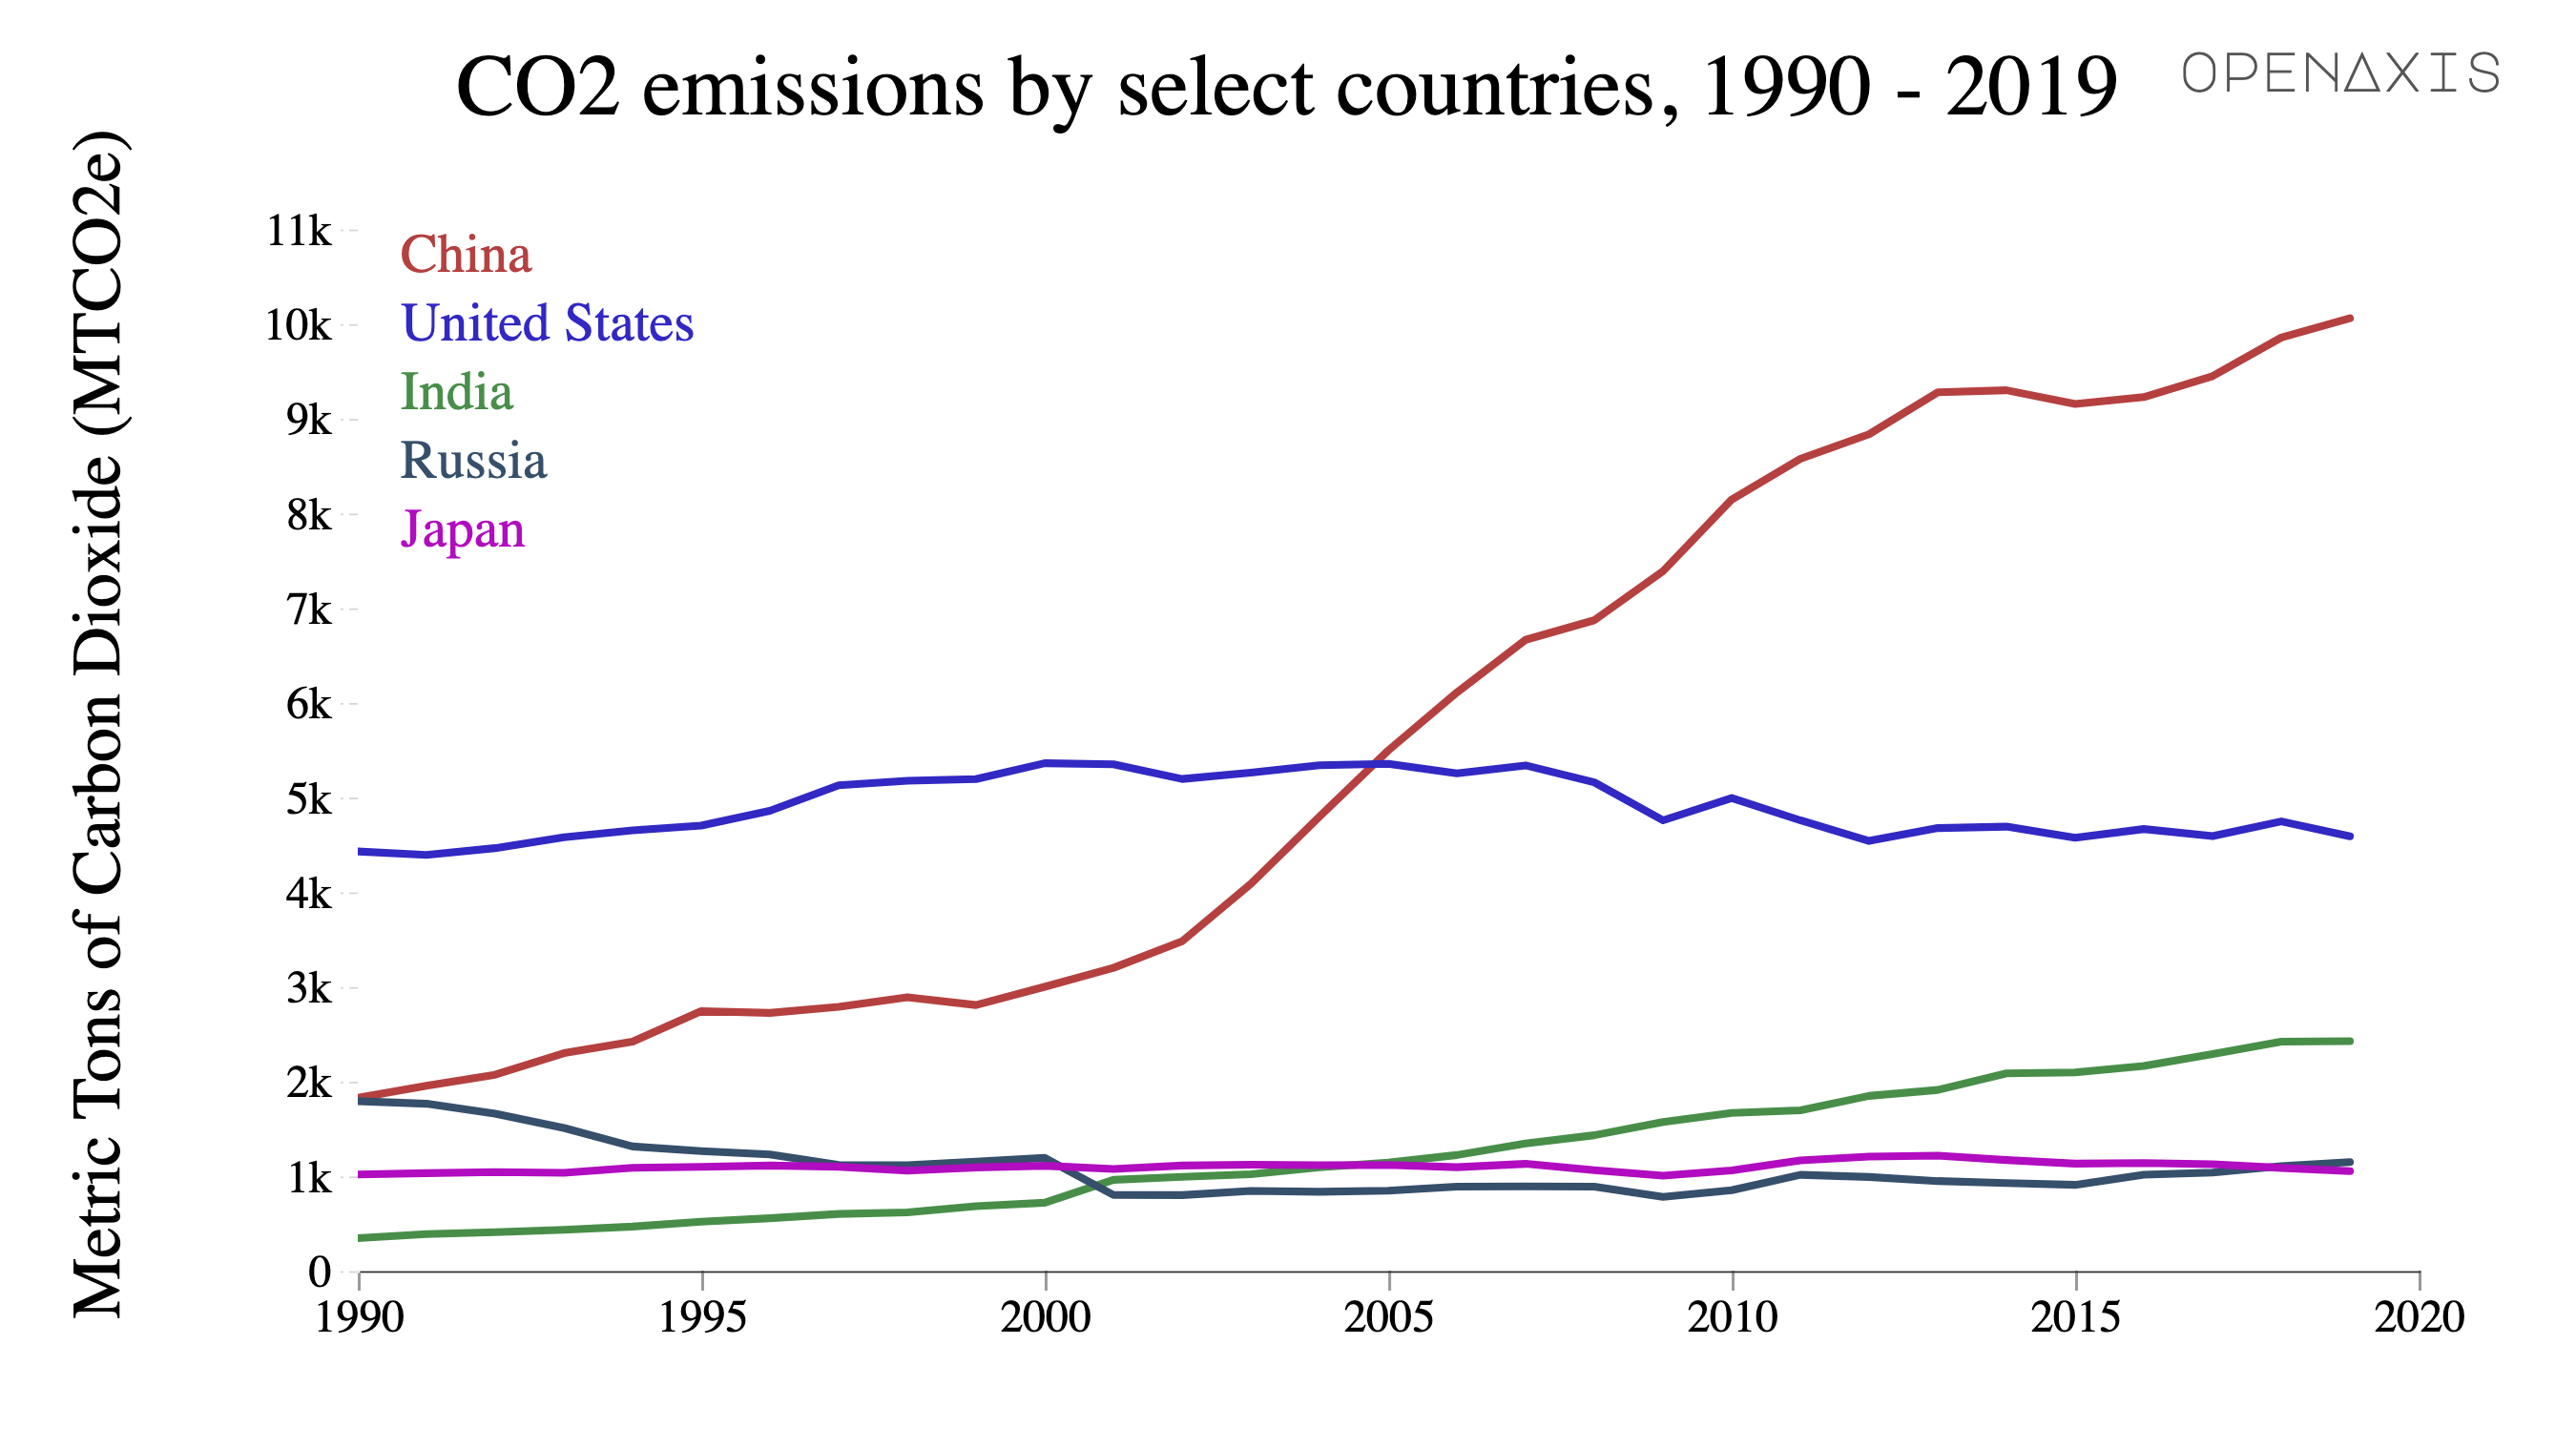 "CO2 emissions by select countries, 1990 - 2019"